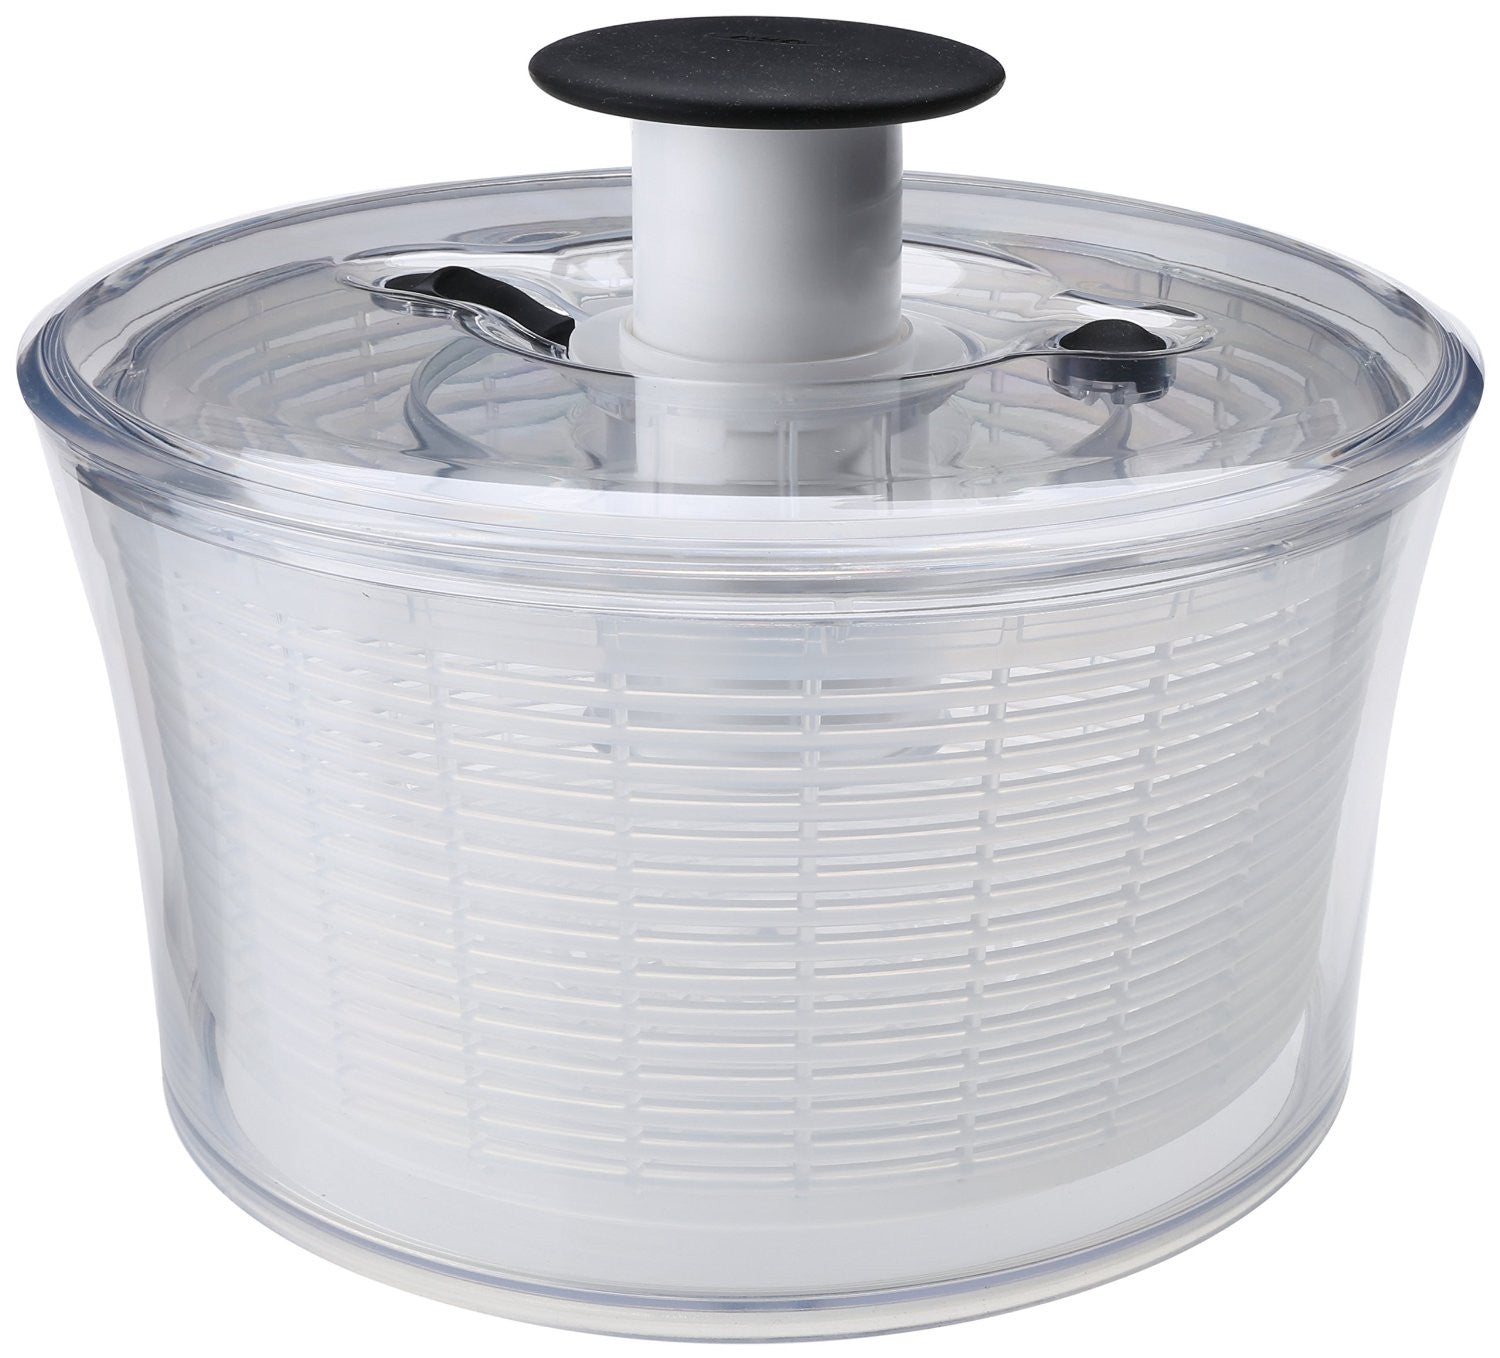 OXO Stainless-Steel Salad Spinner  Salad spinner, Salad spinners